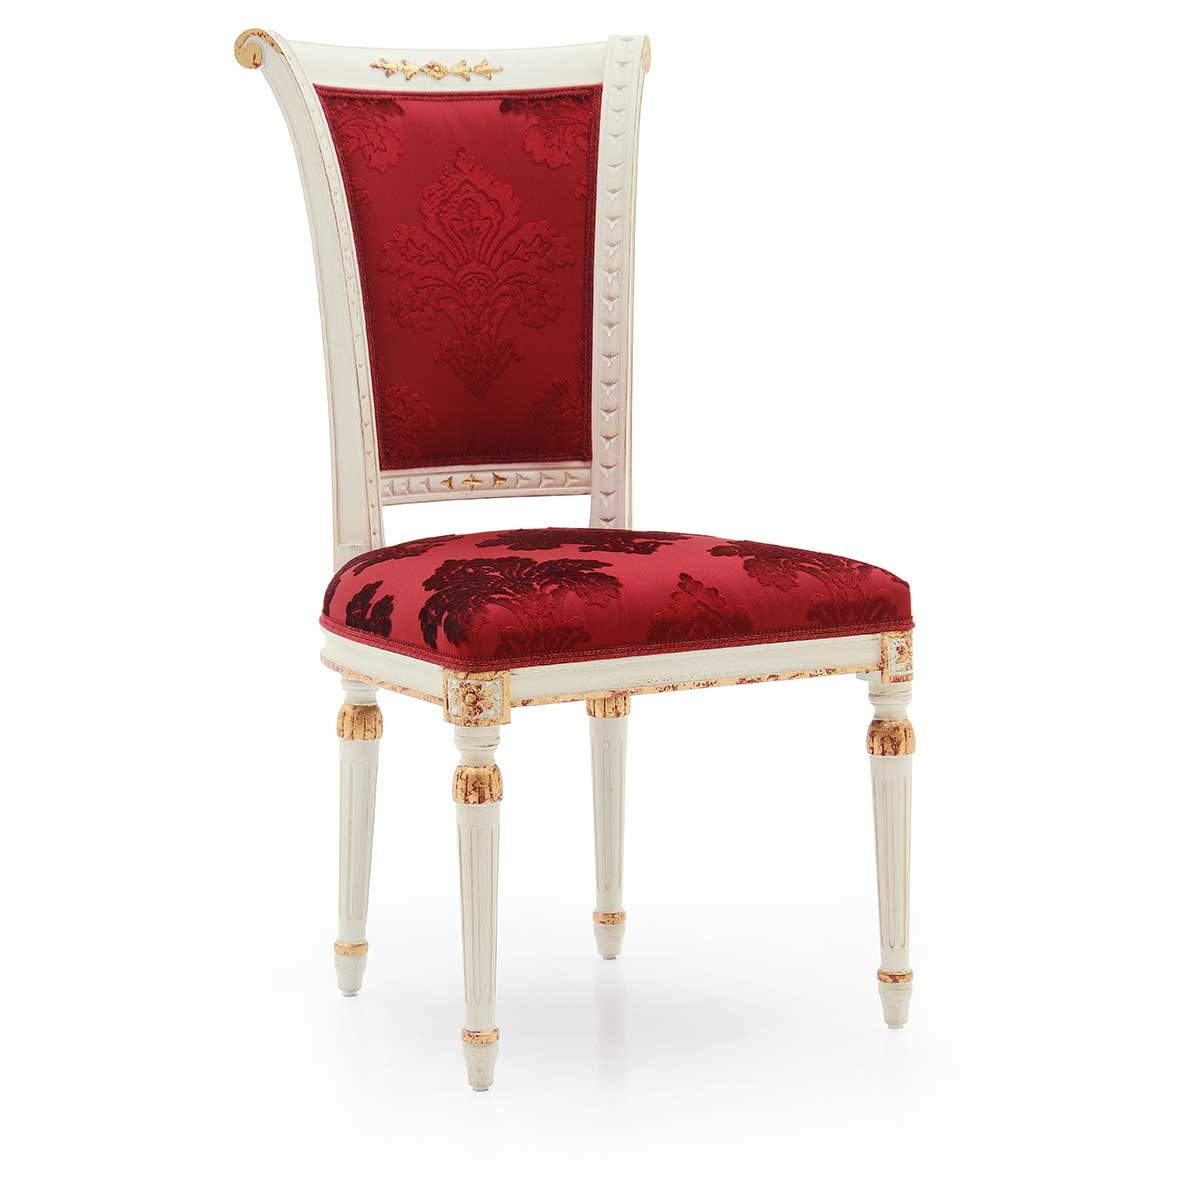 Red upholstered classic chair with wooden frame SVETLANA by Sevensedie in empire style